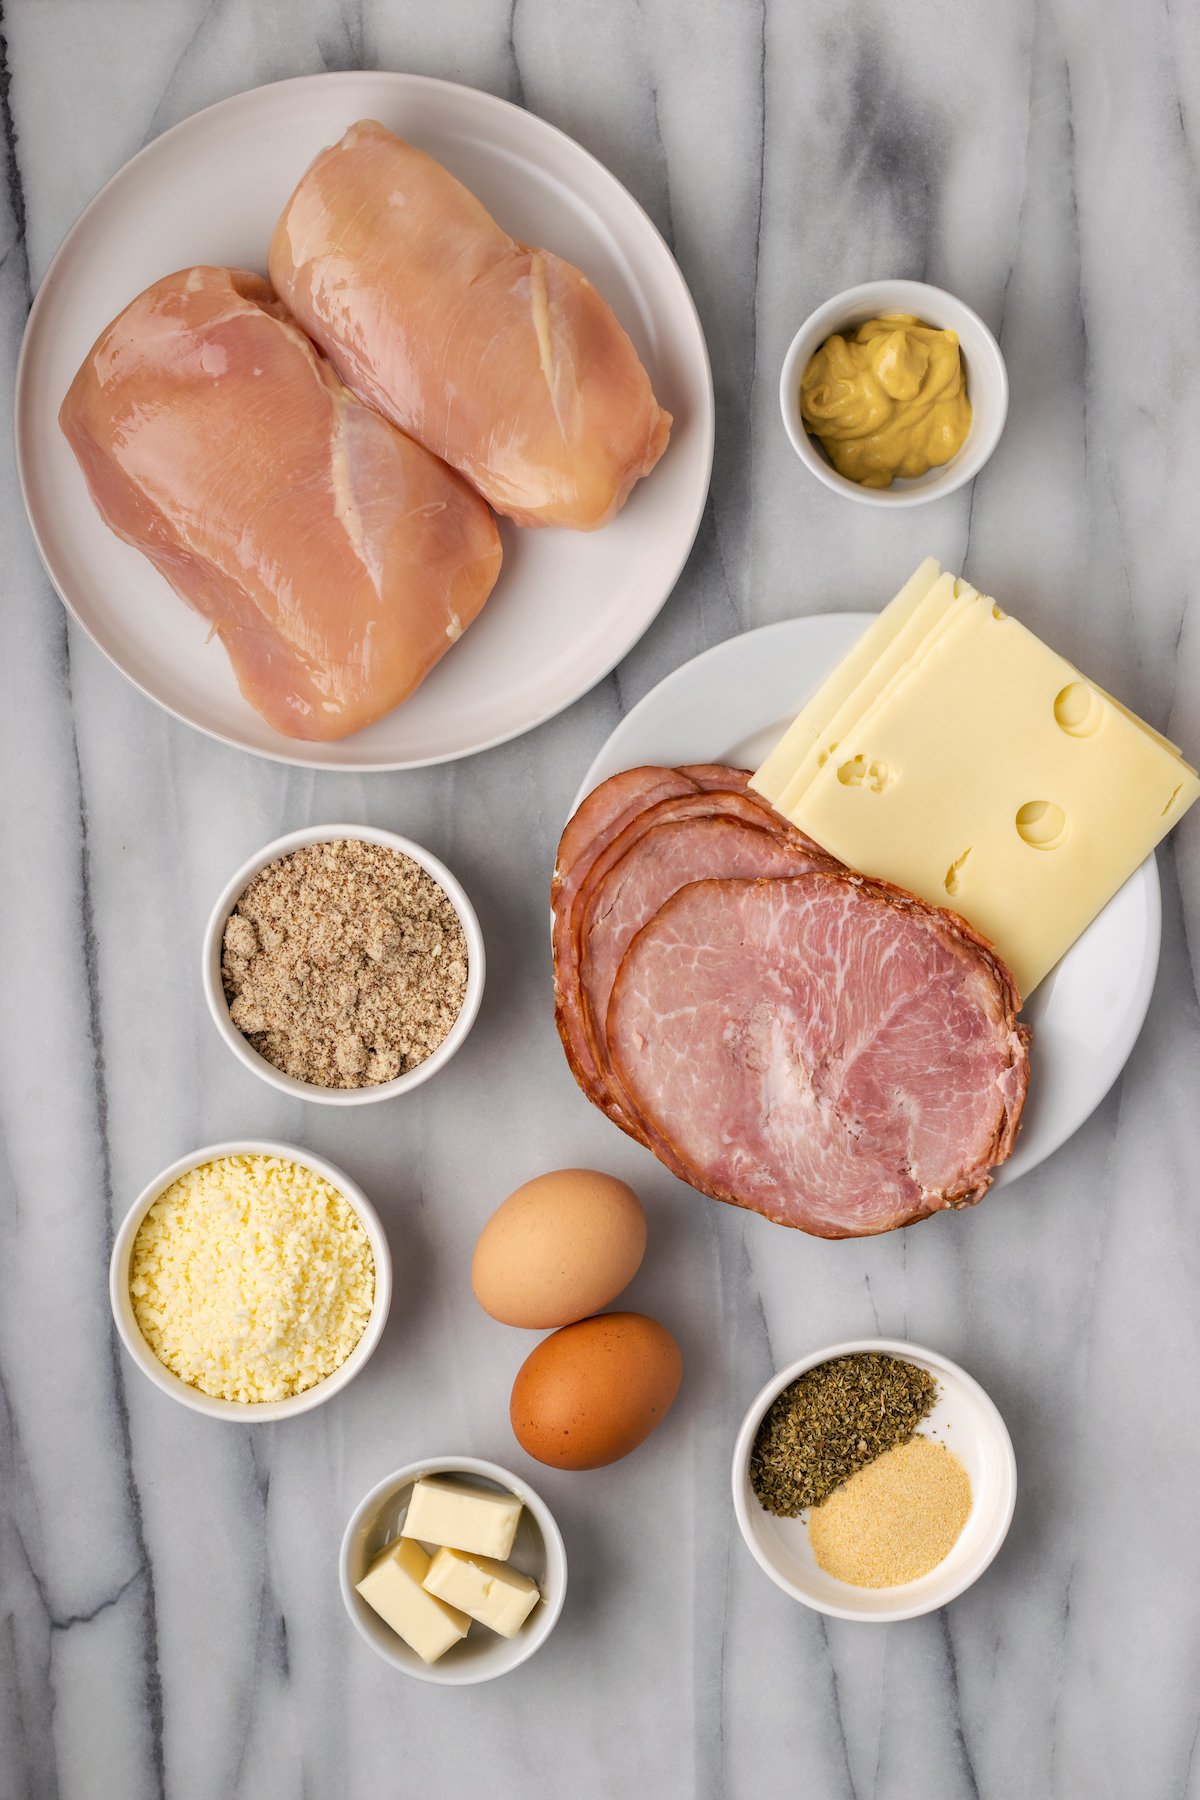 Overhead view of the ingredients needed for chicken cordon bleu: a plate of chicken breasts, a plate with ham and cheese, a bowl of dijon, a bowl of almond flour, a bowl of parmesan cheese, a bowl of garlic powder and Italian seasoning, a ramekin of butter, and two eggs